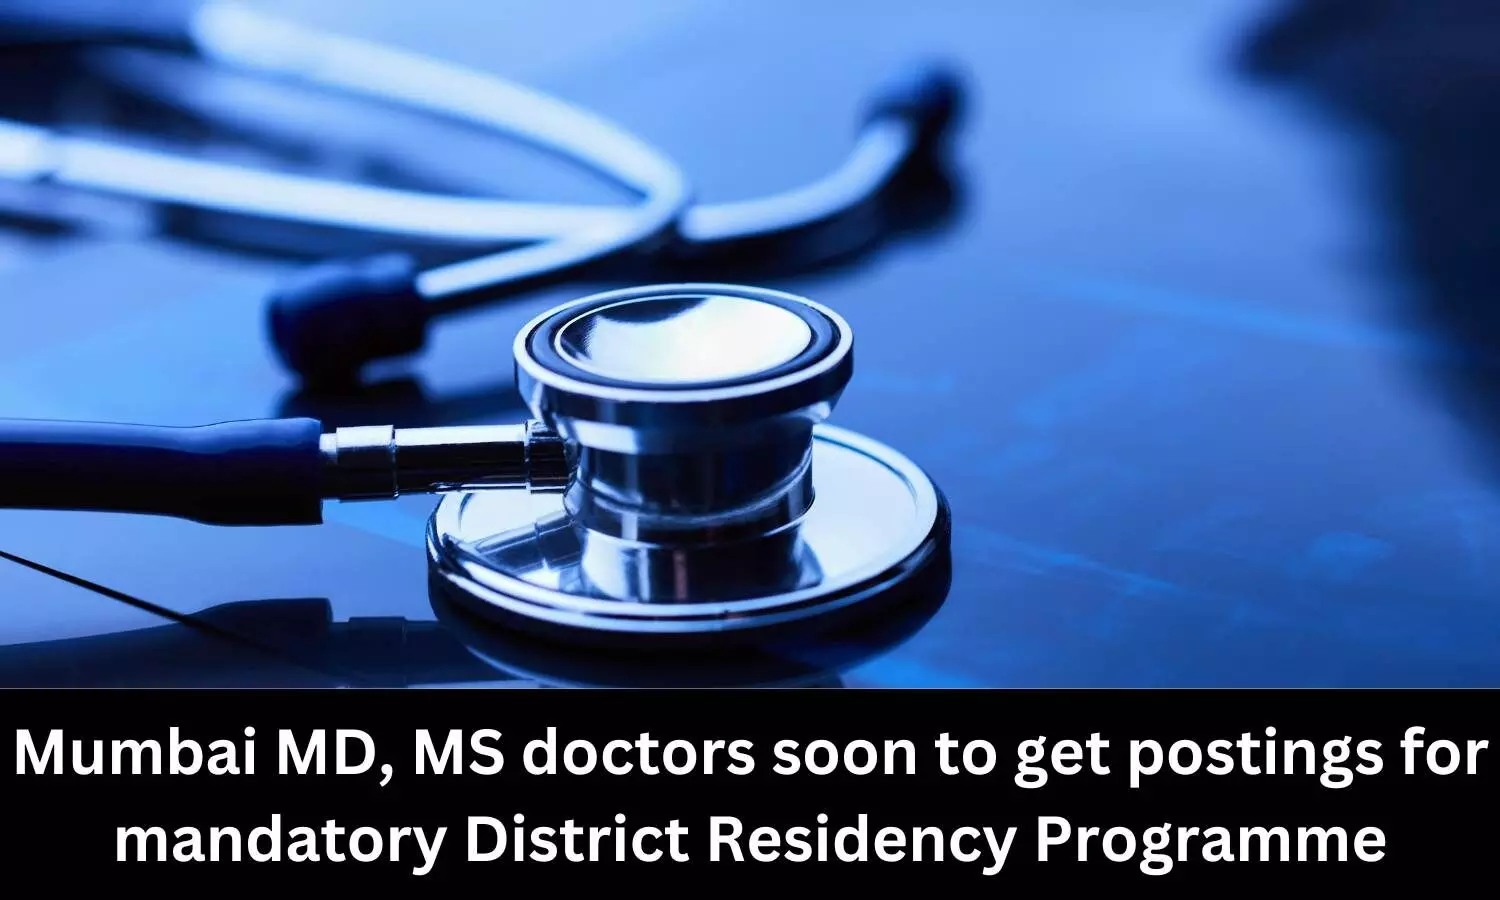 Mumbai MD, MS doctors soon to get postings for mandatory District Residency Programme